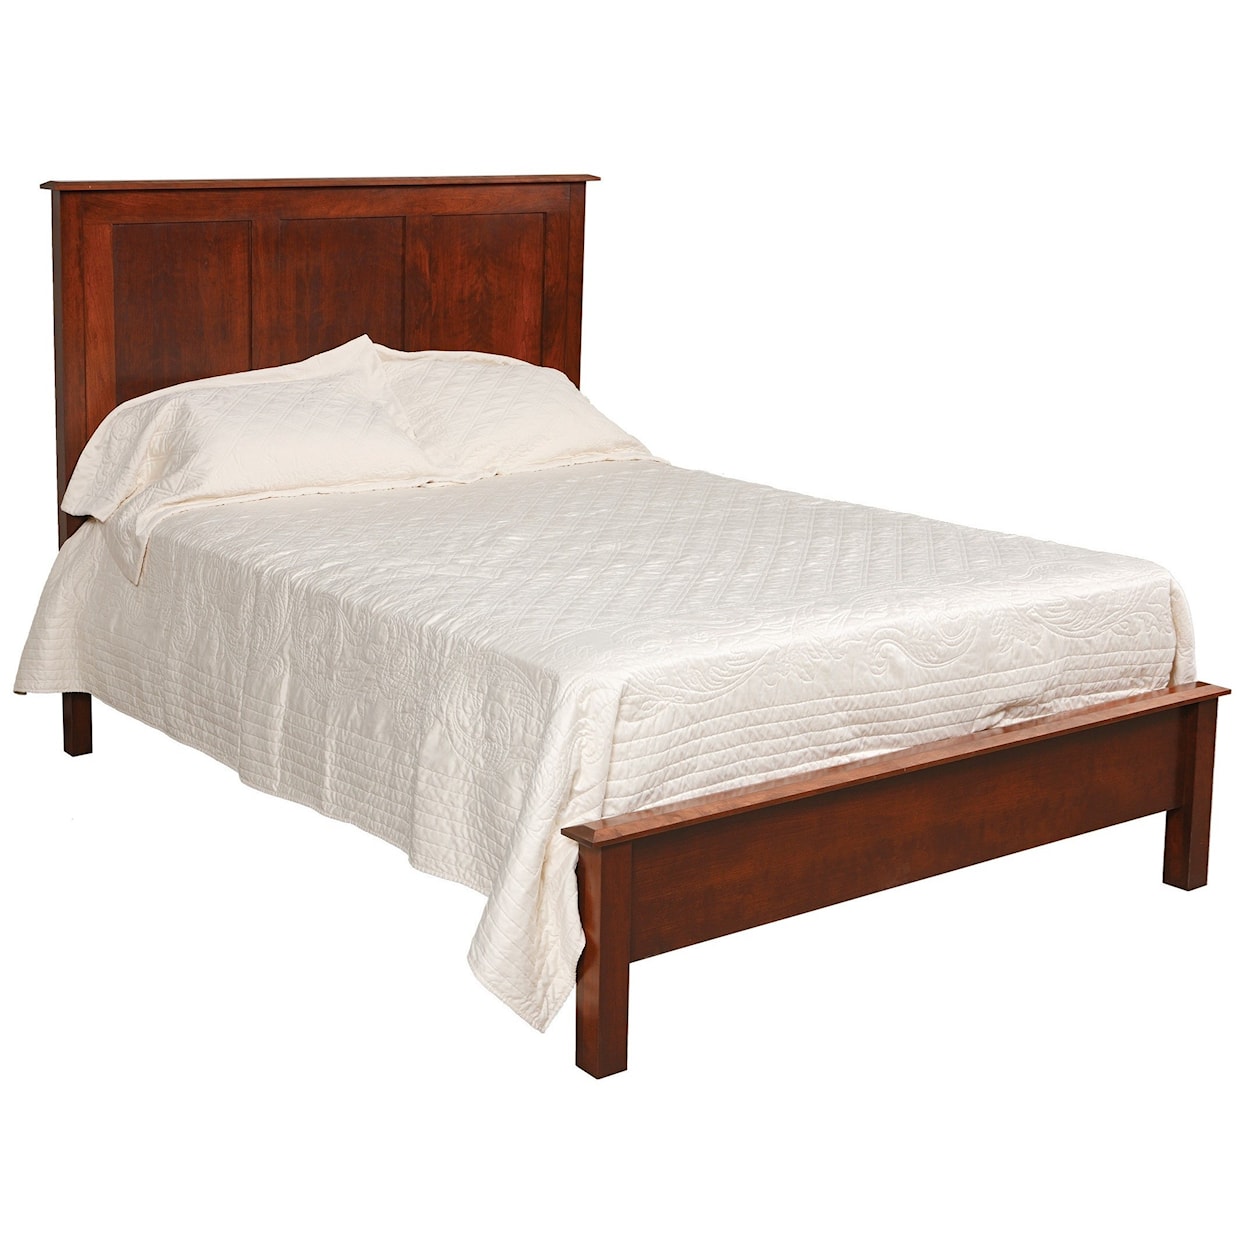 Daniel's Amish Manchester Solid Wood California King Bed